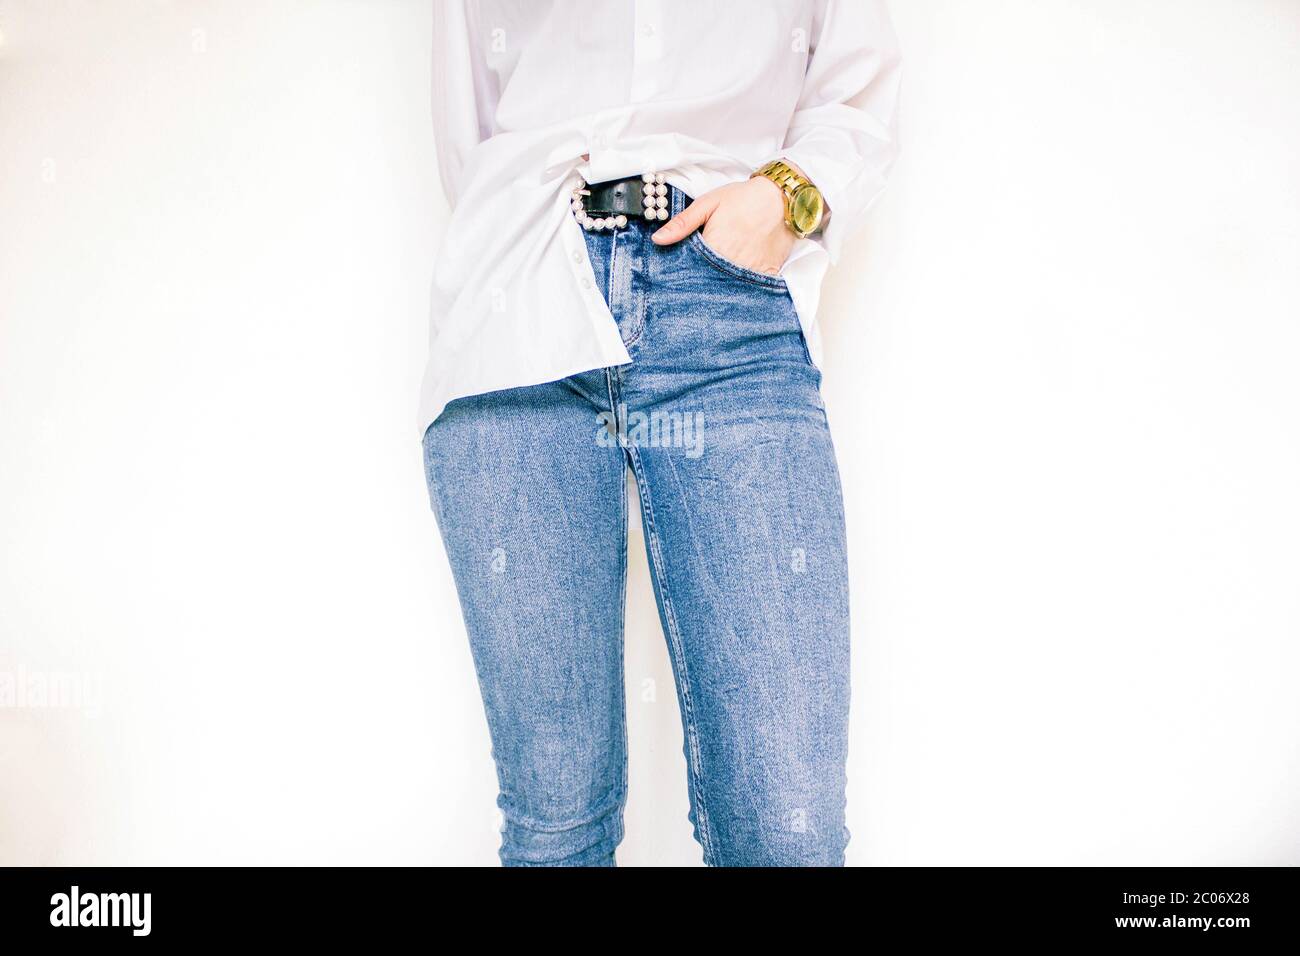 female body part, white shirt, jeans and watch on the wrist Stock Photo